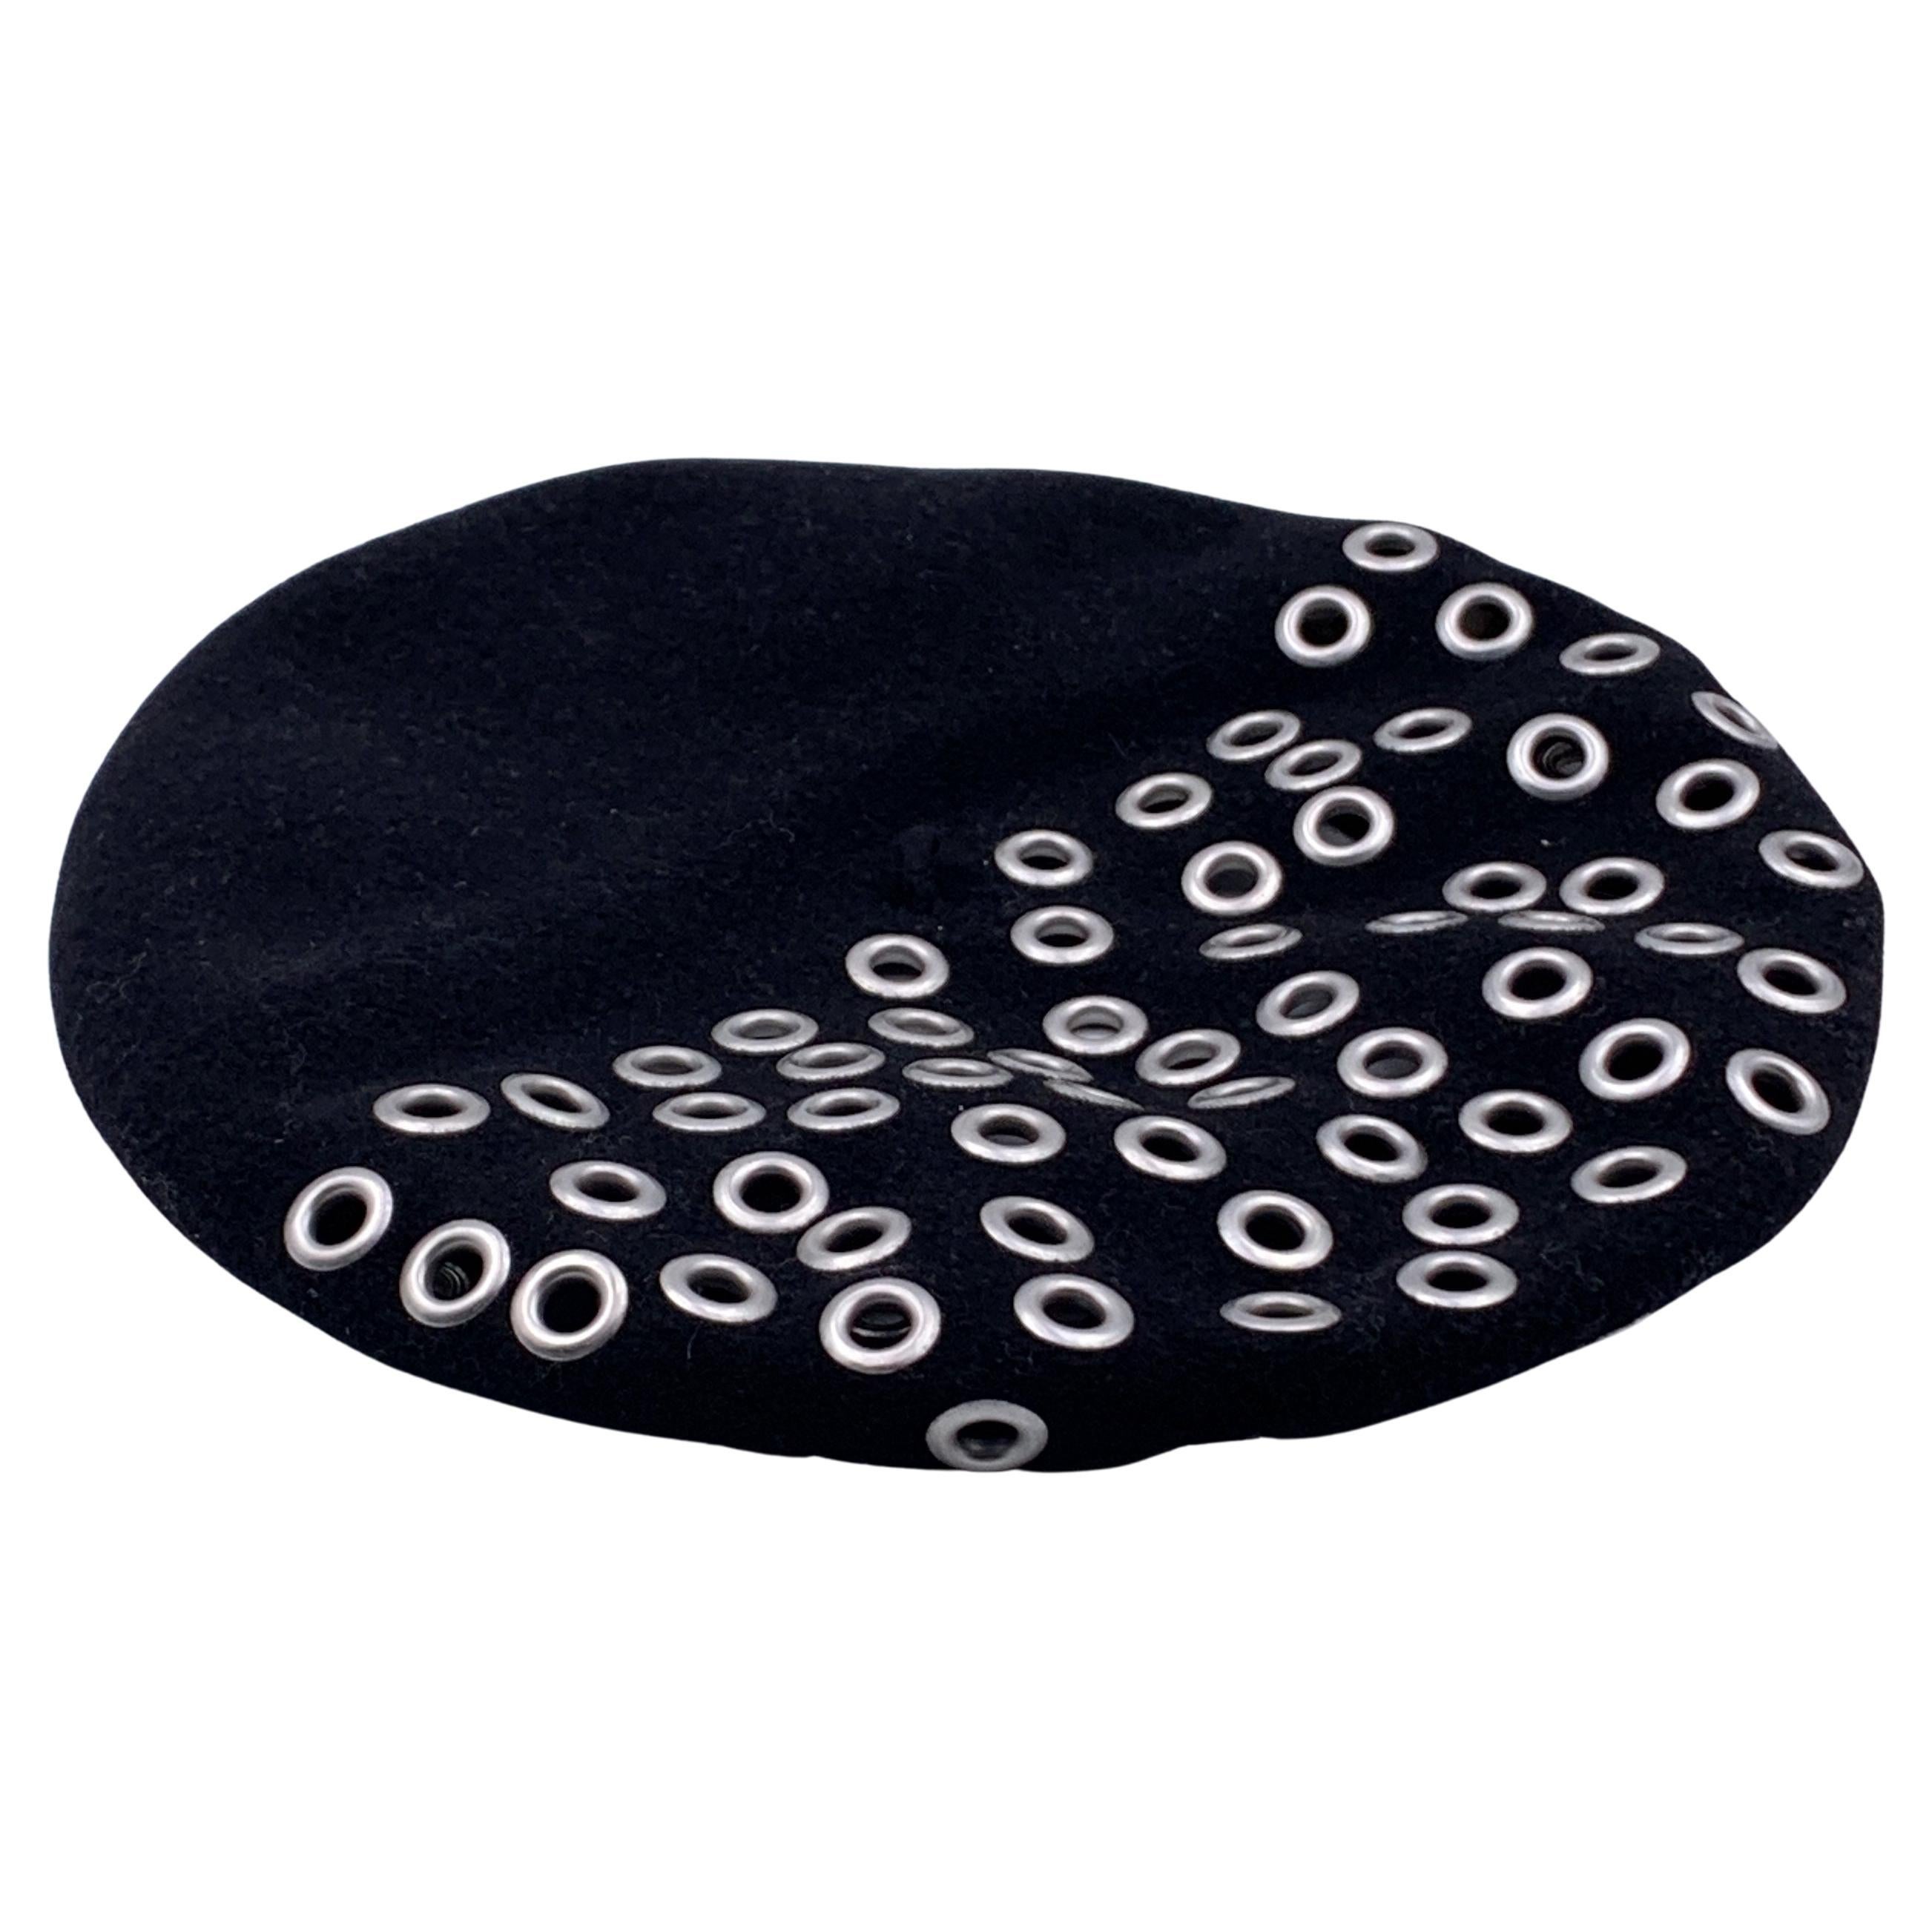 Christian Dior Black Wool Grommets Eyelets French Beret Hat For Sale